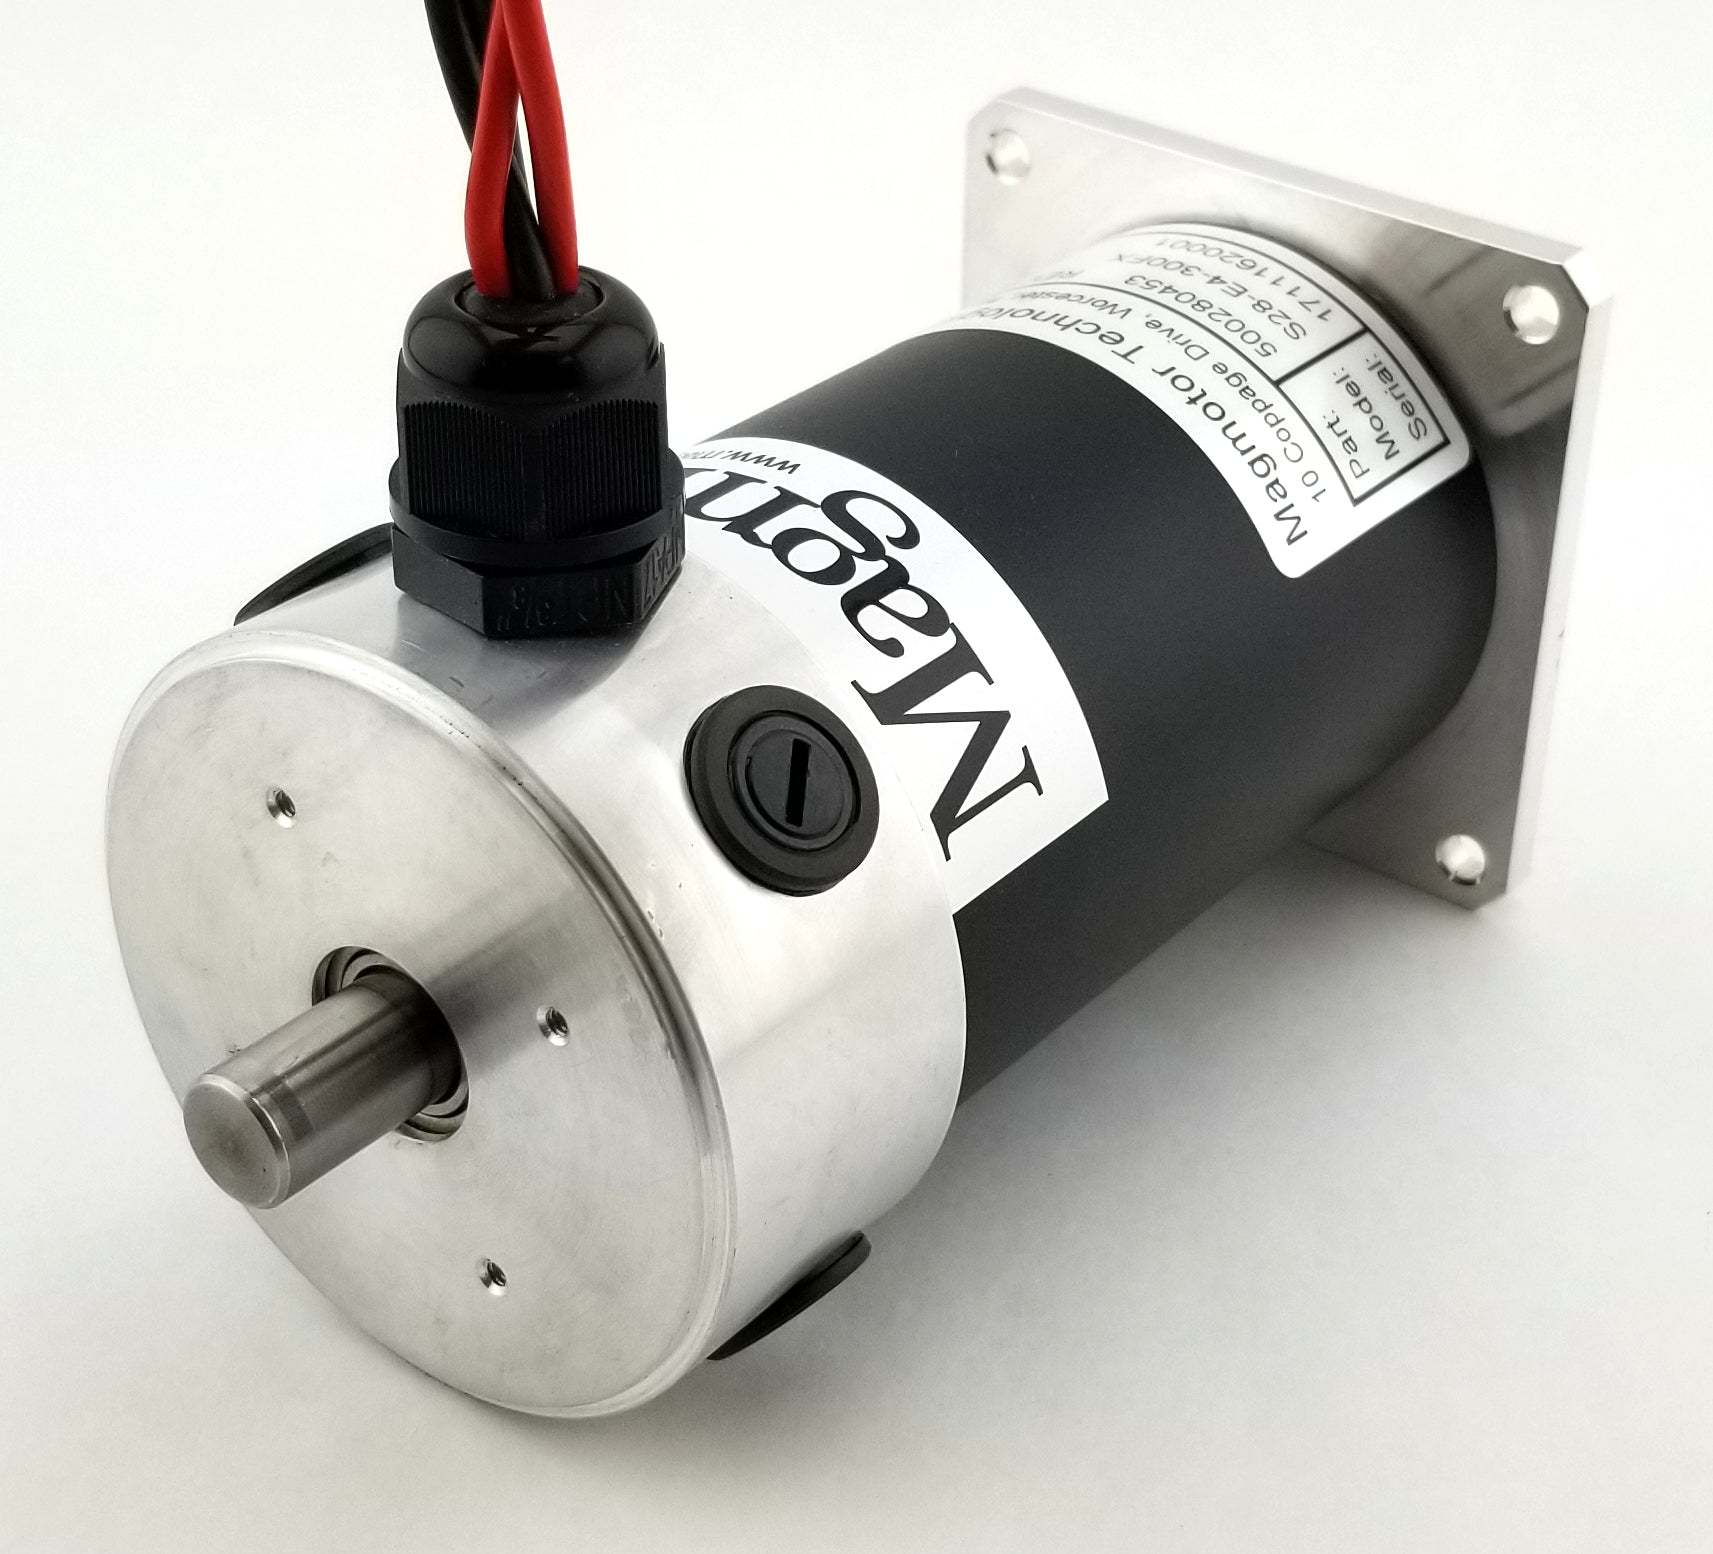 Magmotor S28-E4-300FX 12 to 24 Volt 4 Pole Brushed Motor 500280453 Rear View